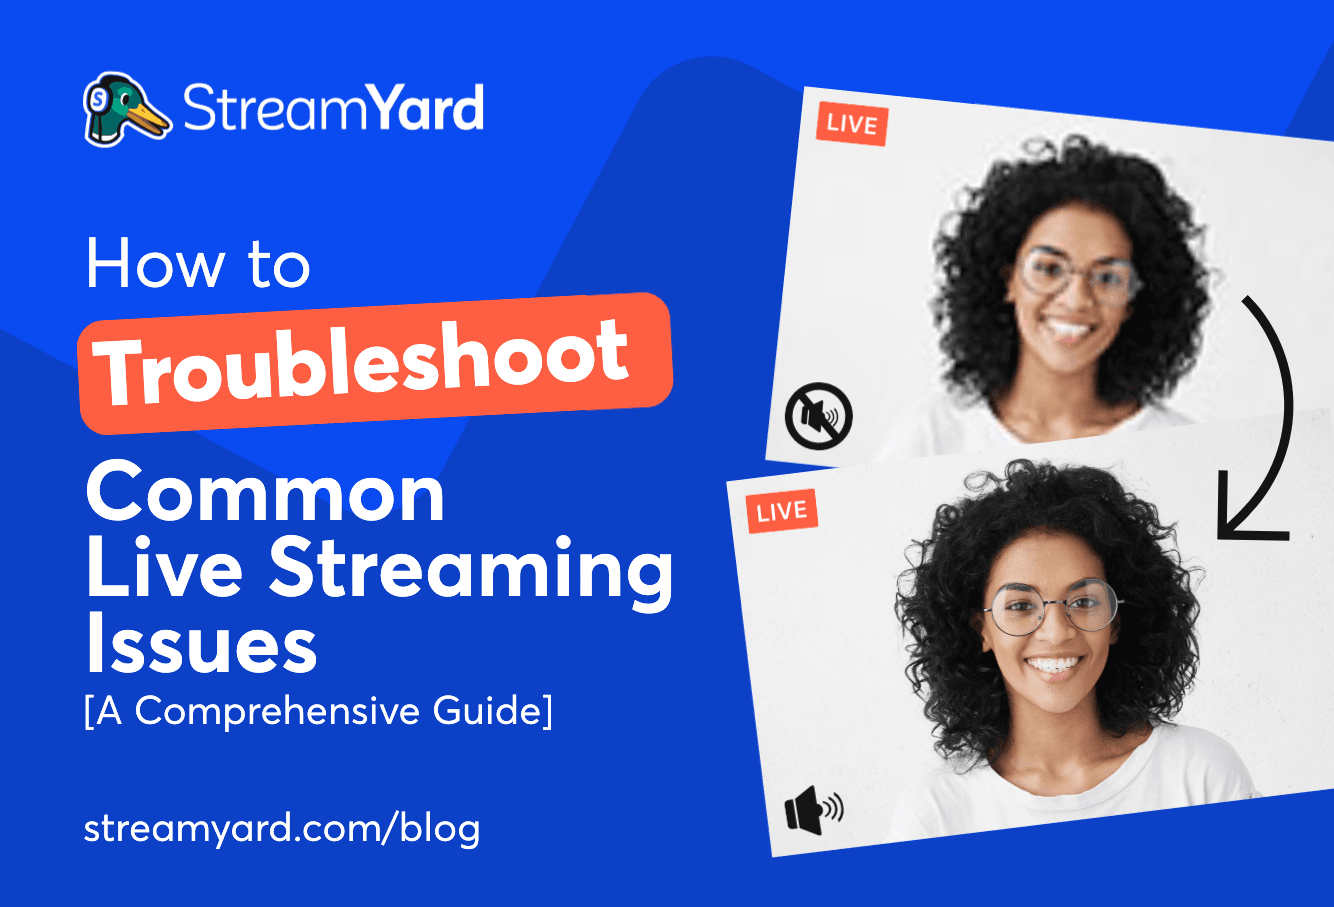 Learn how to troubleshoot common live streaming issues and deliver seamless, smooth live broadcasts each time you go live.